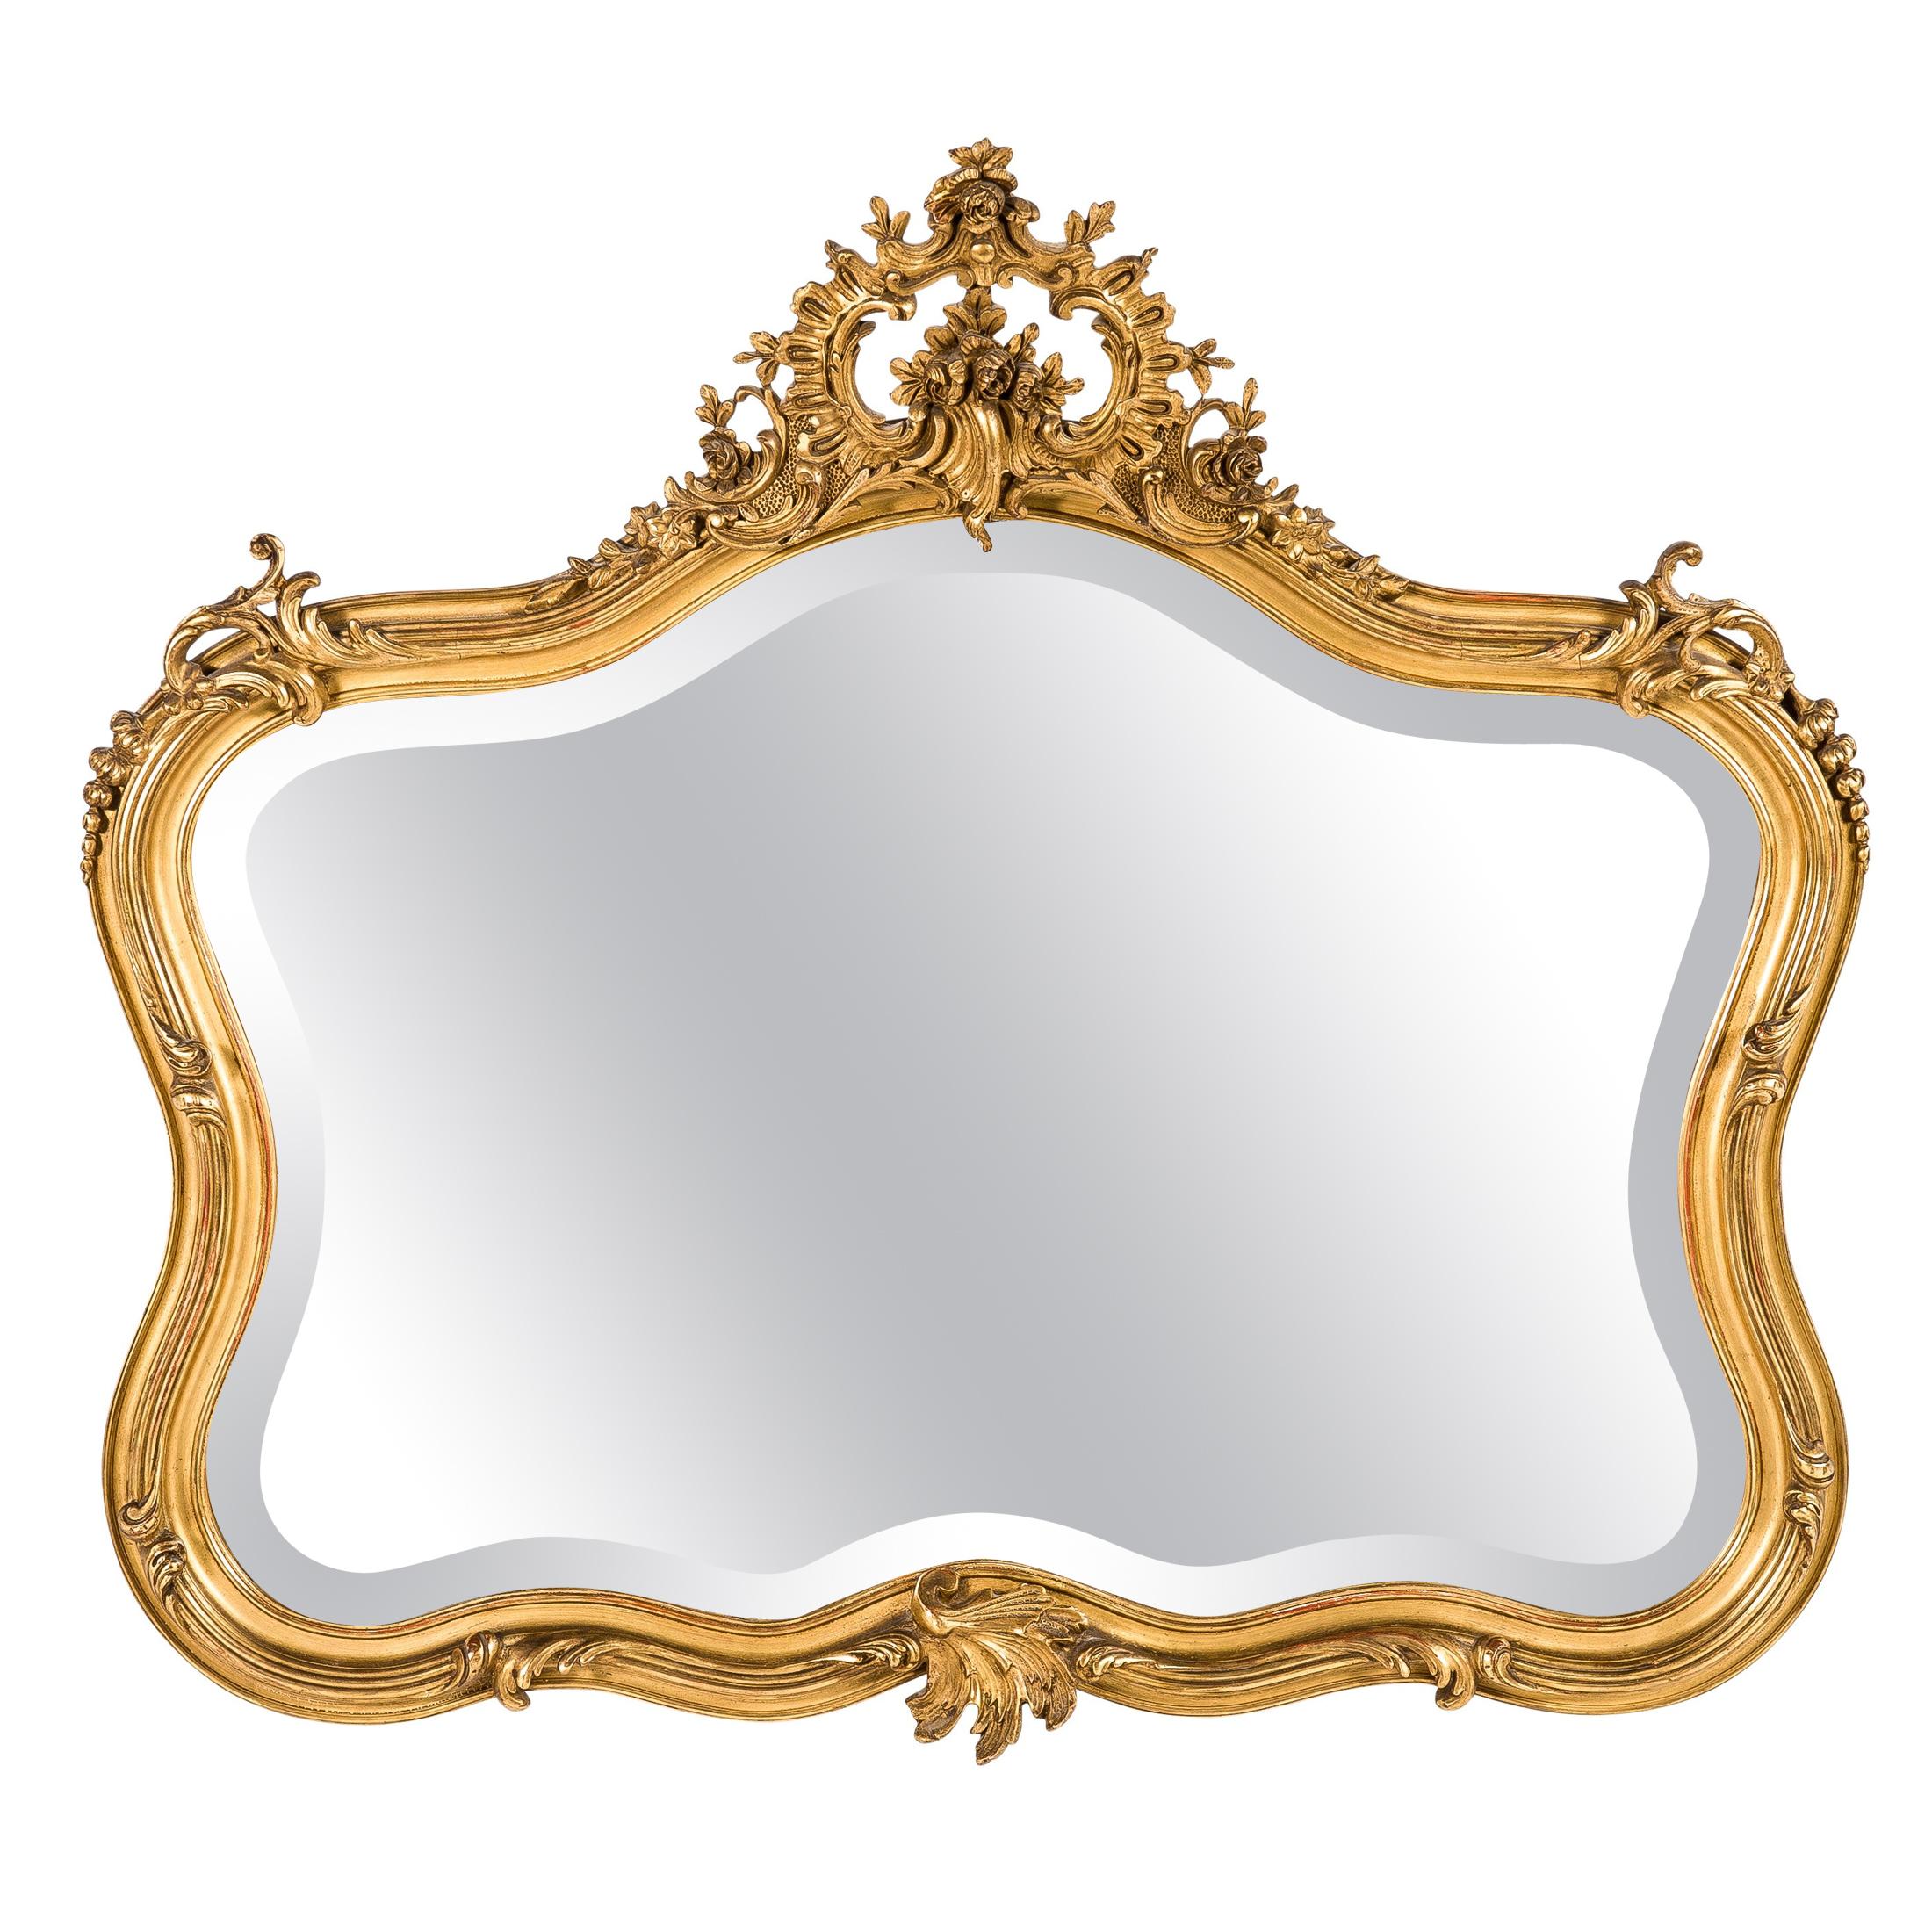 Antique French Louis XV or Rococo Gold Gilt Mirror with Facetted Glass